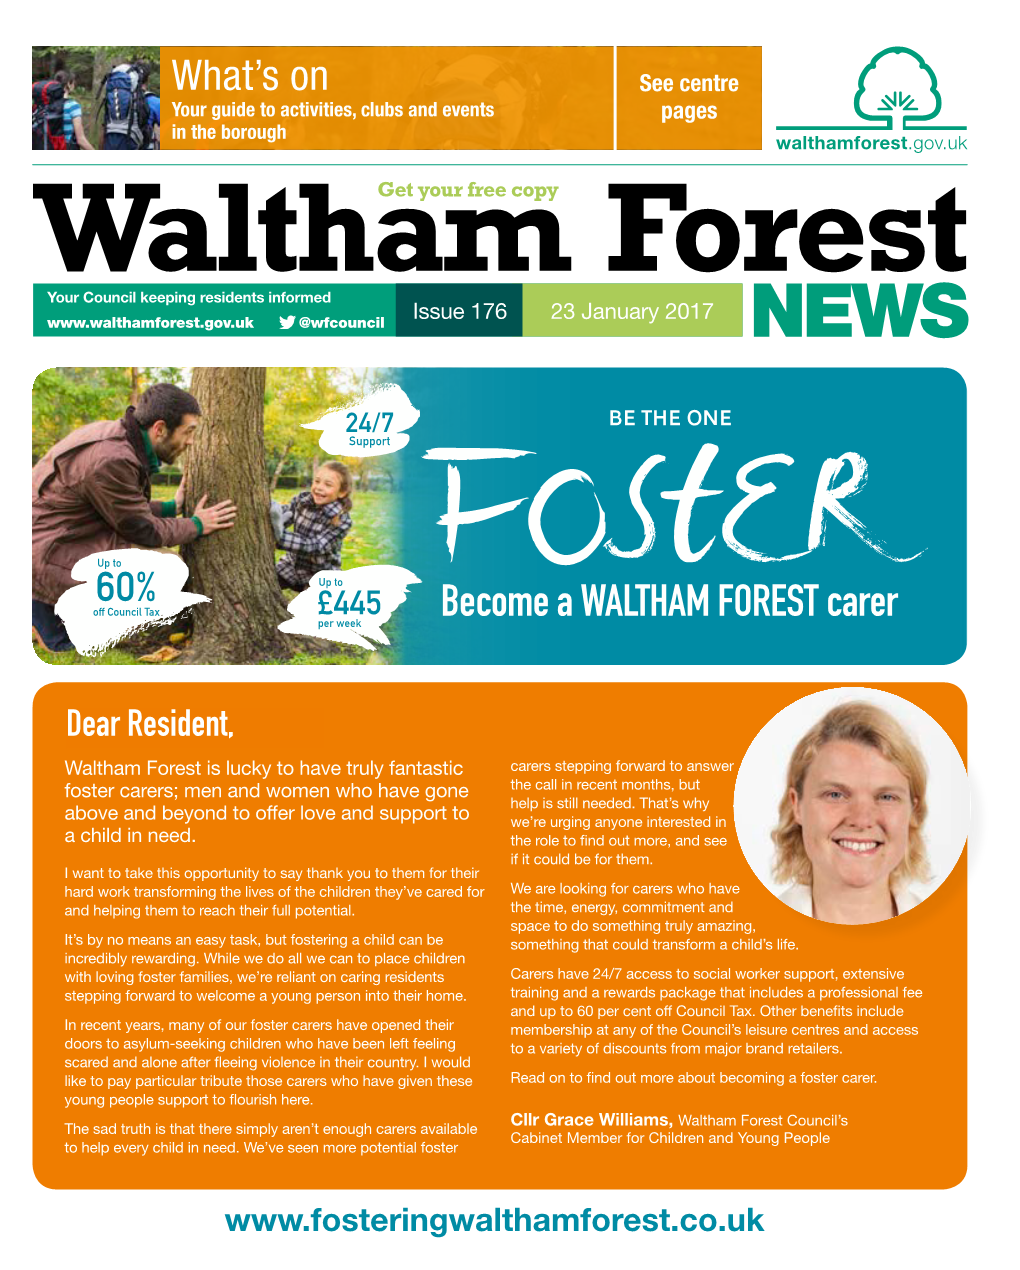 Become a WALTHAM FOREST Carer